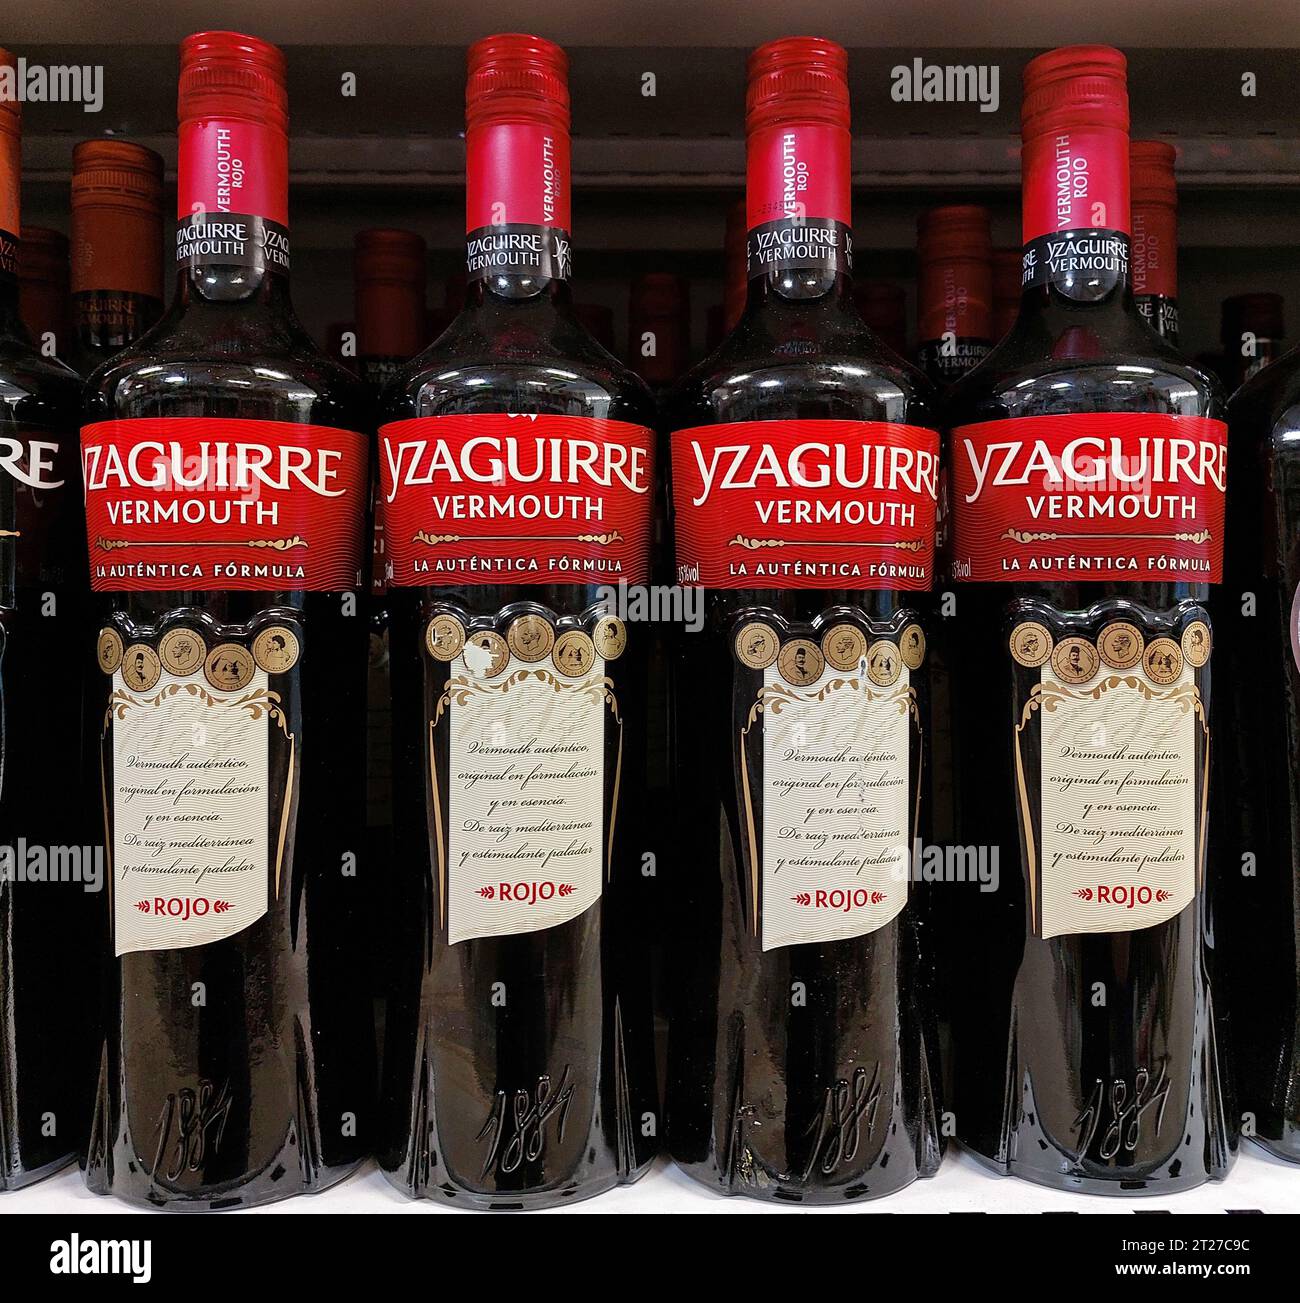 Yzaguirre Rojo Vermouth bottles in a supermarket Stock Photo